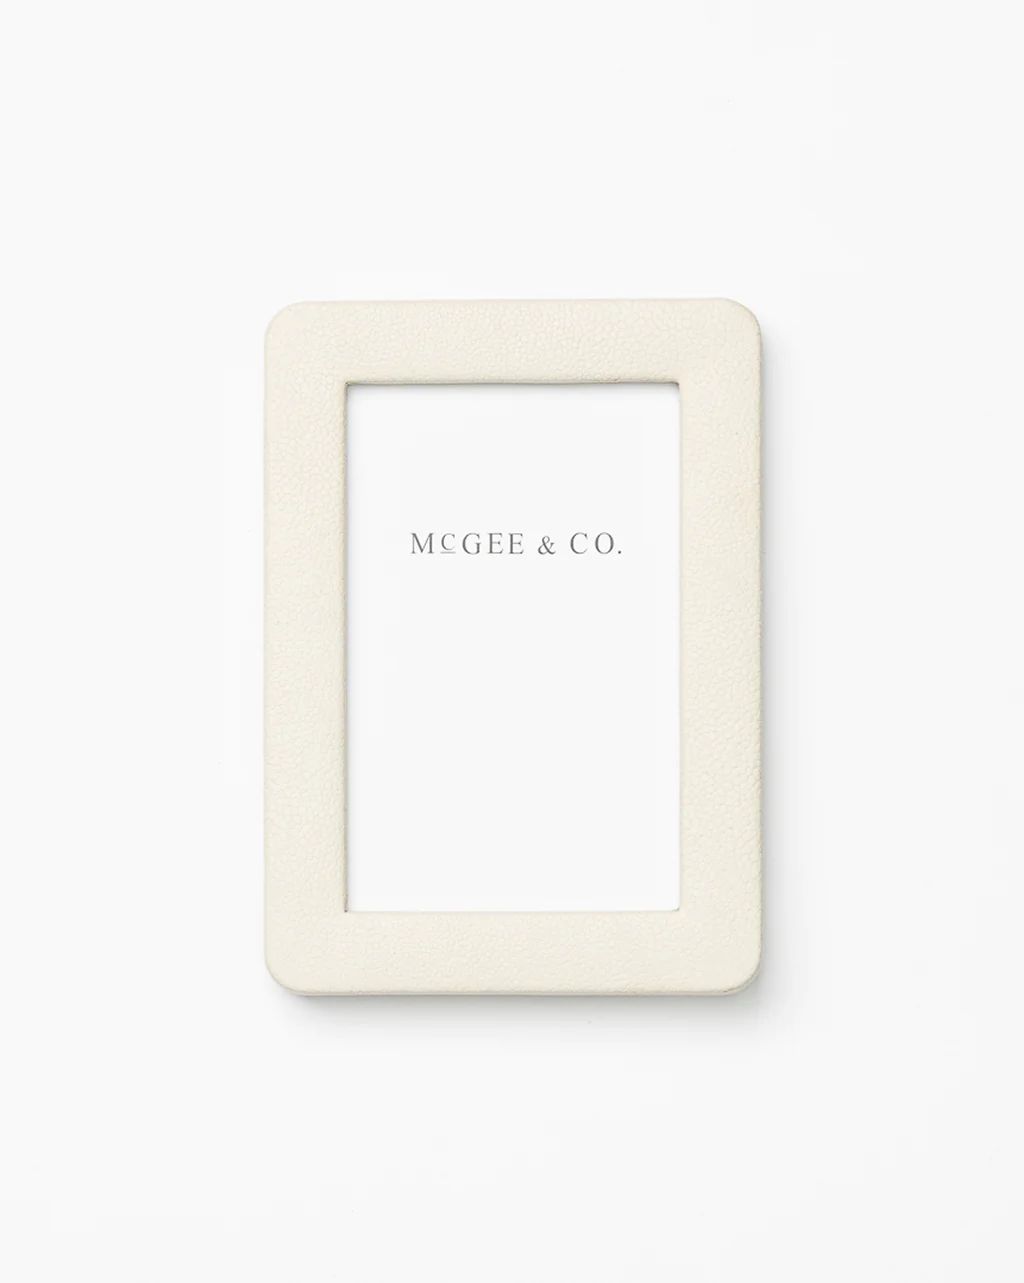 Shagreen Picture Frame | McGee & Co.